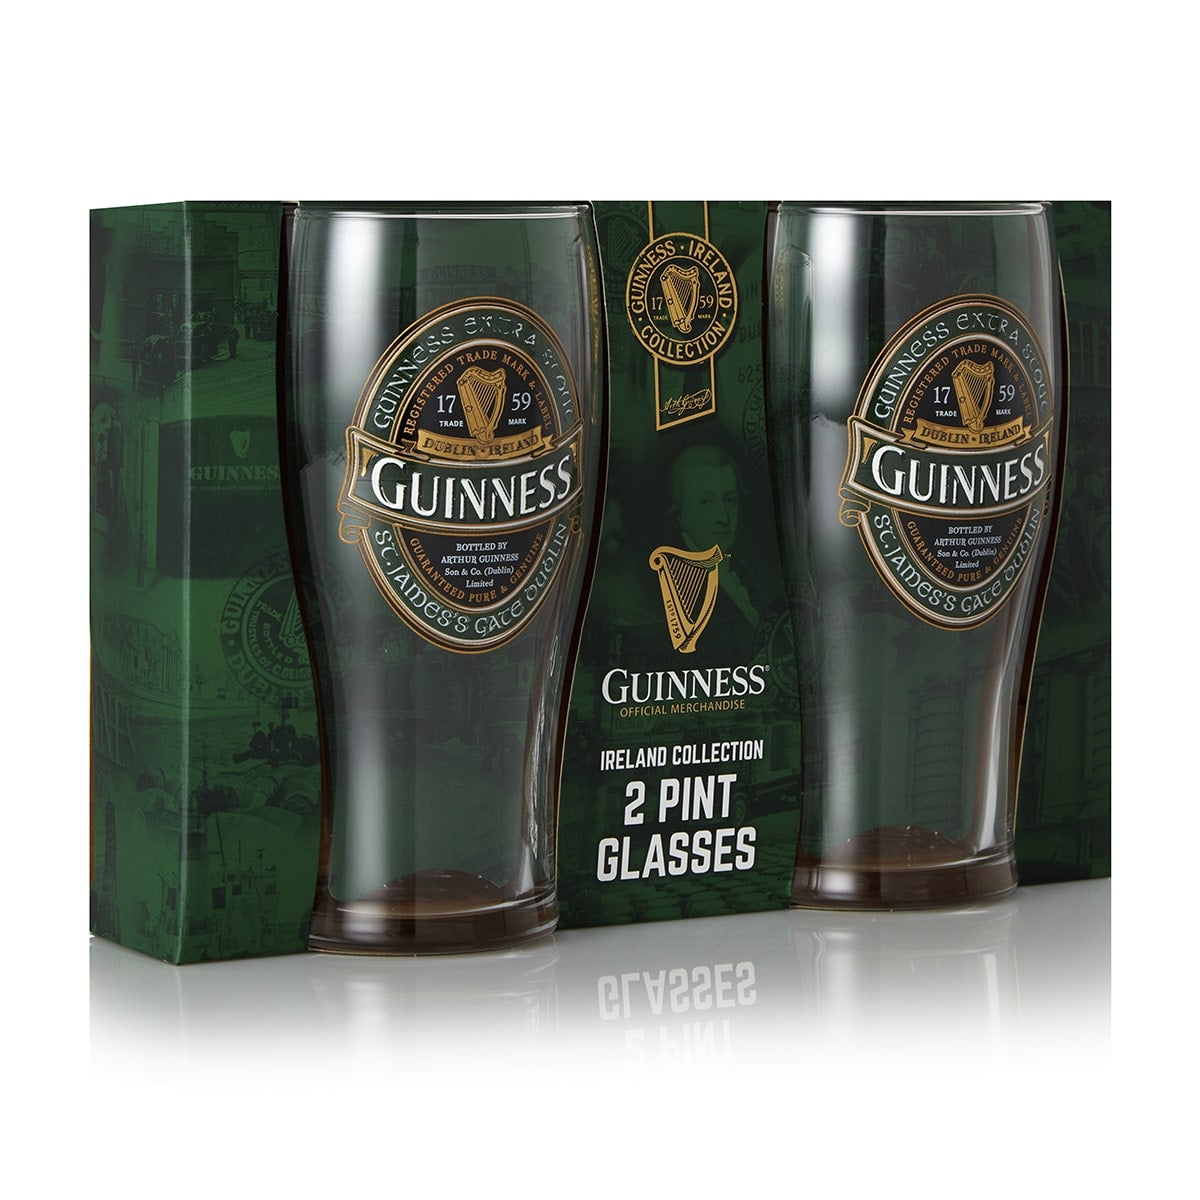 Set of 2 Guinness Ireland Collection Pint Glasses - imported from Ireland.